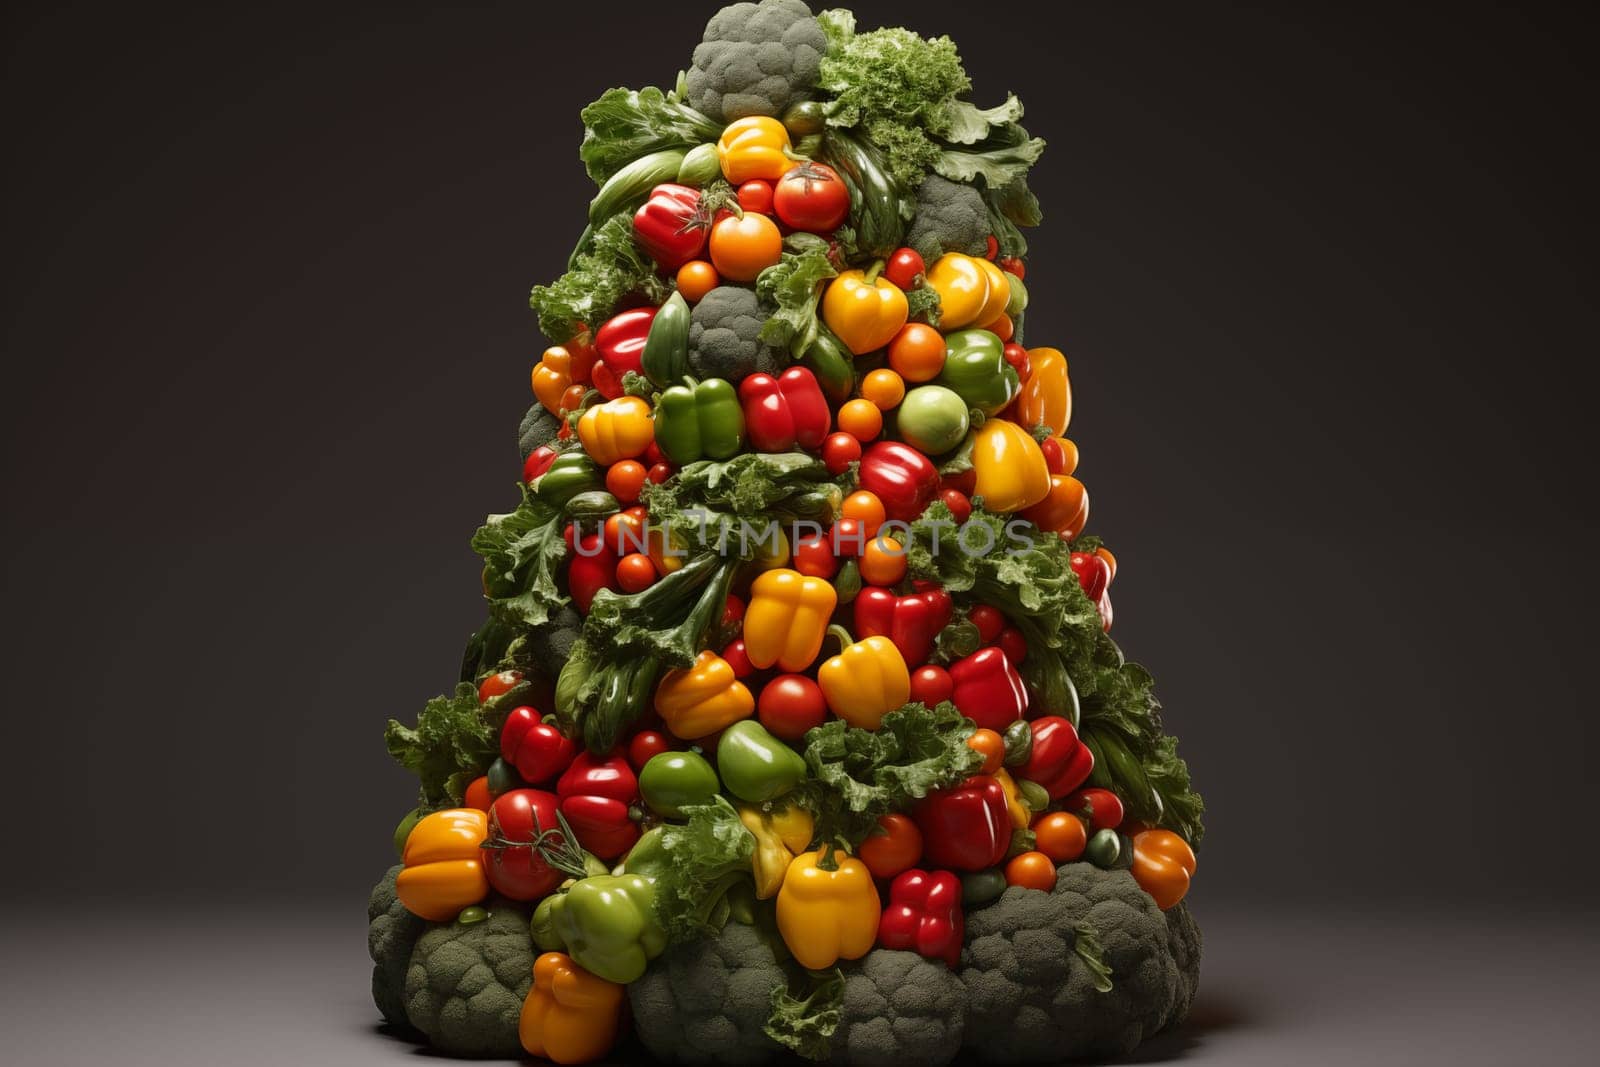 Christmas tree made of fresh vegetables in the shape of a pyramid by Zakharova